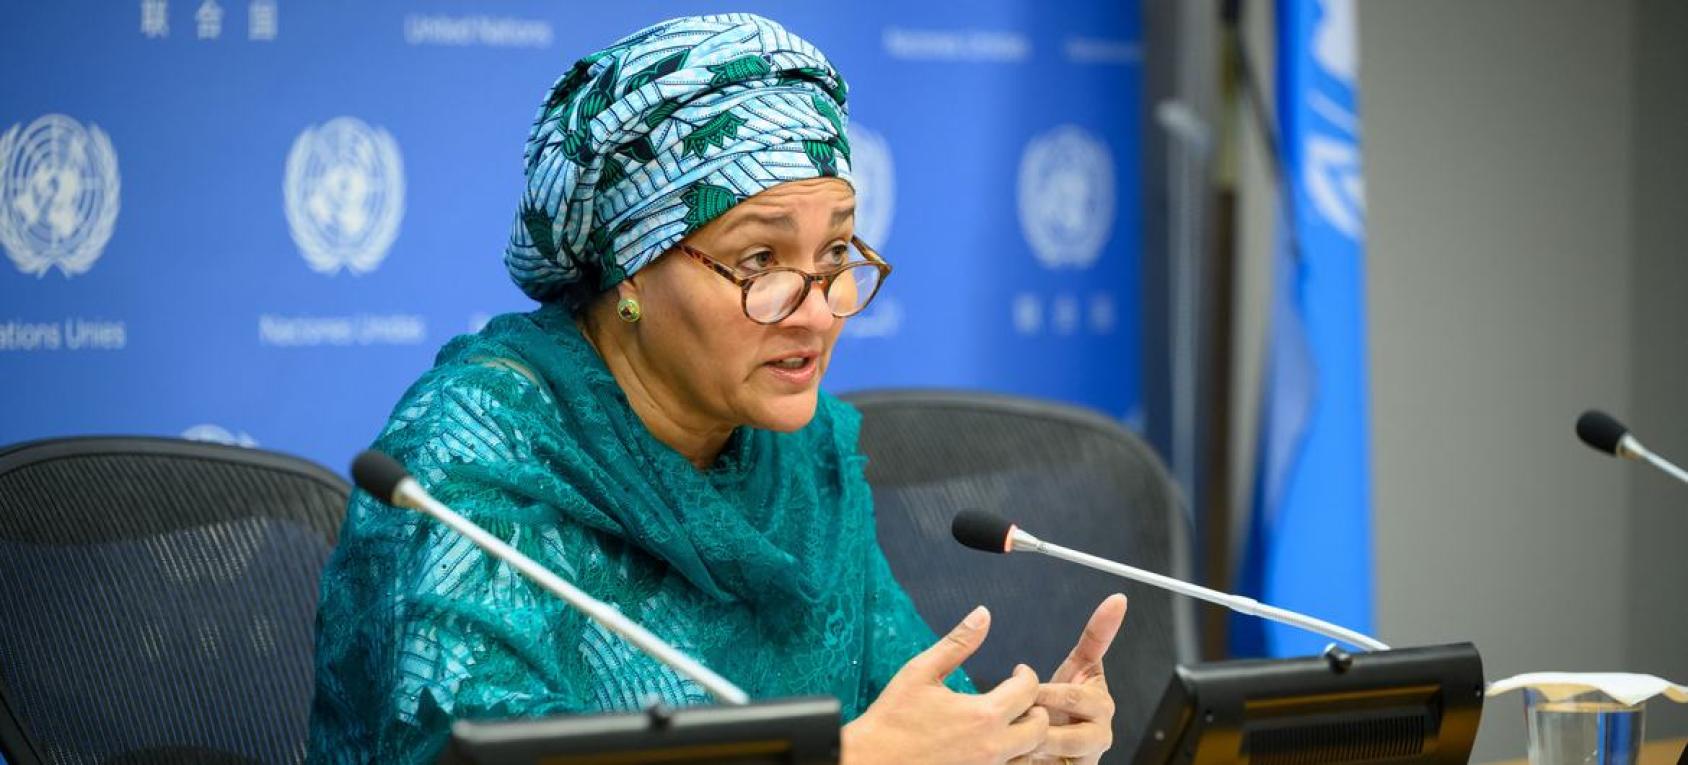 Woman in green dress and headscarf speaking into a microphone against a blue background with UN logo